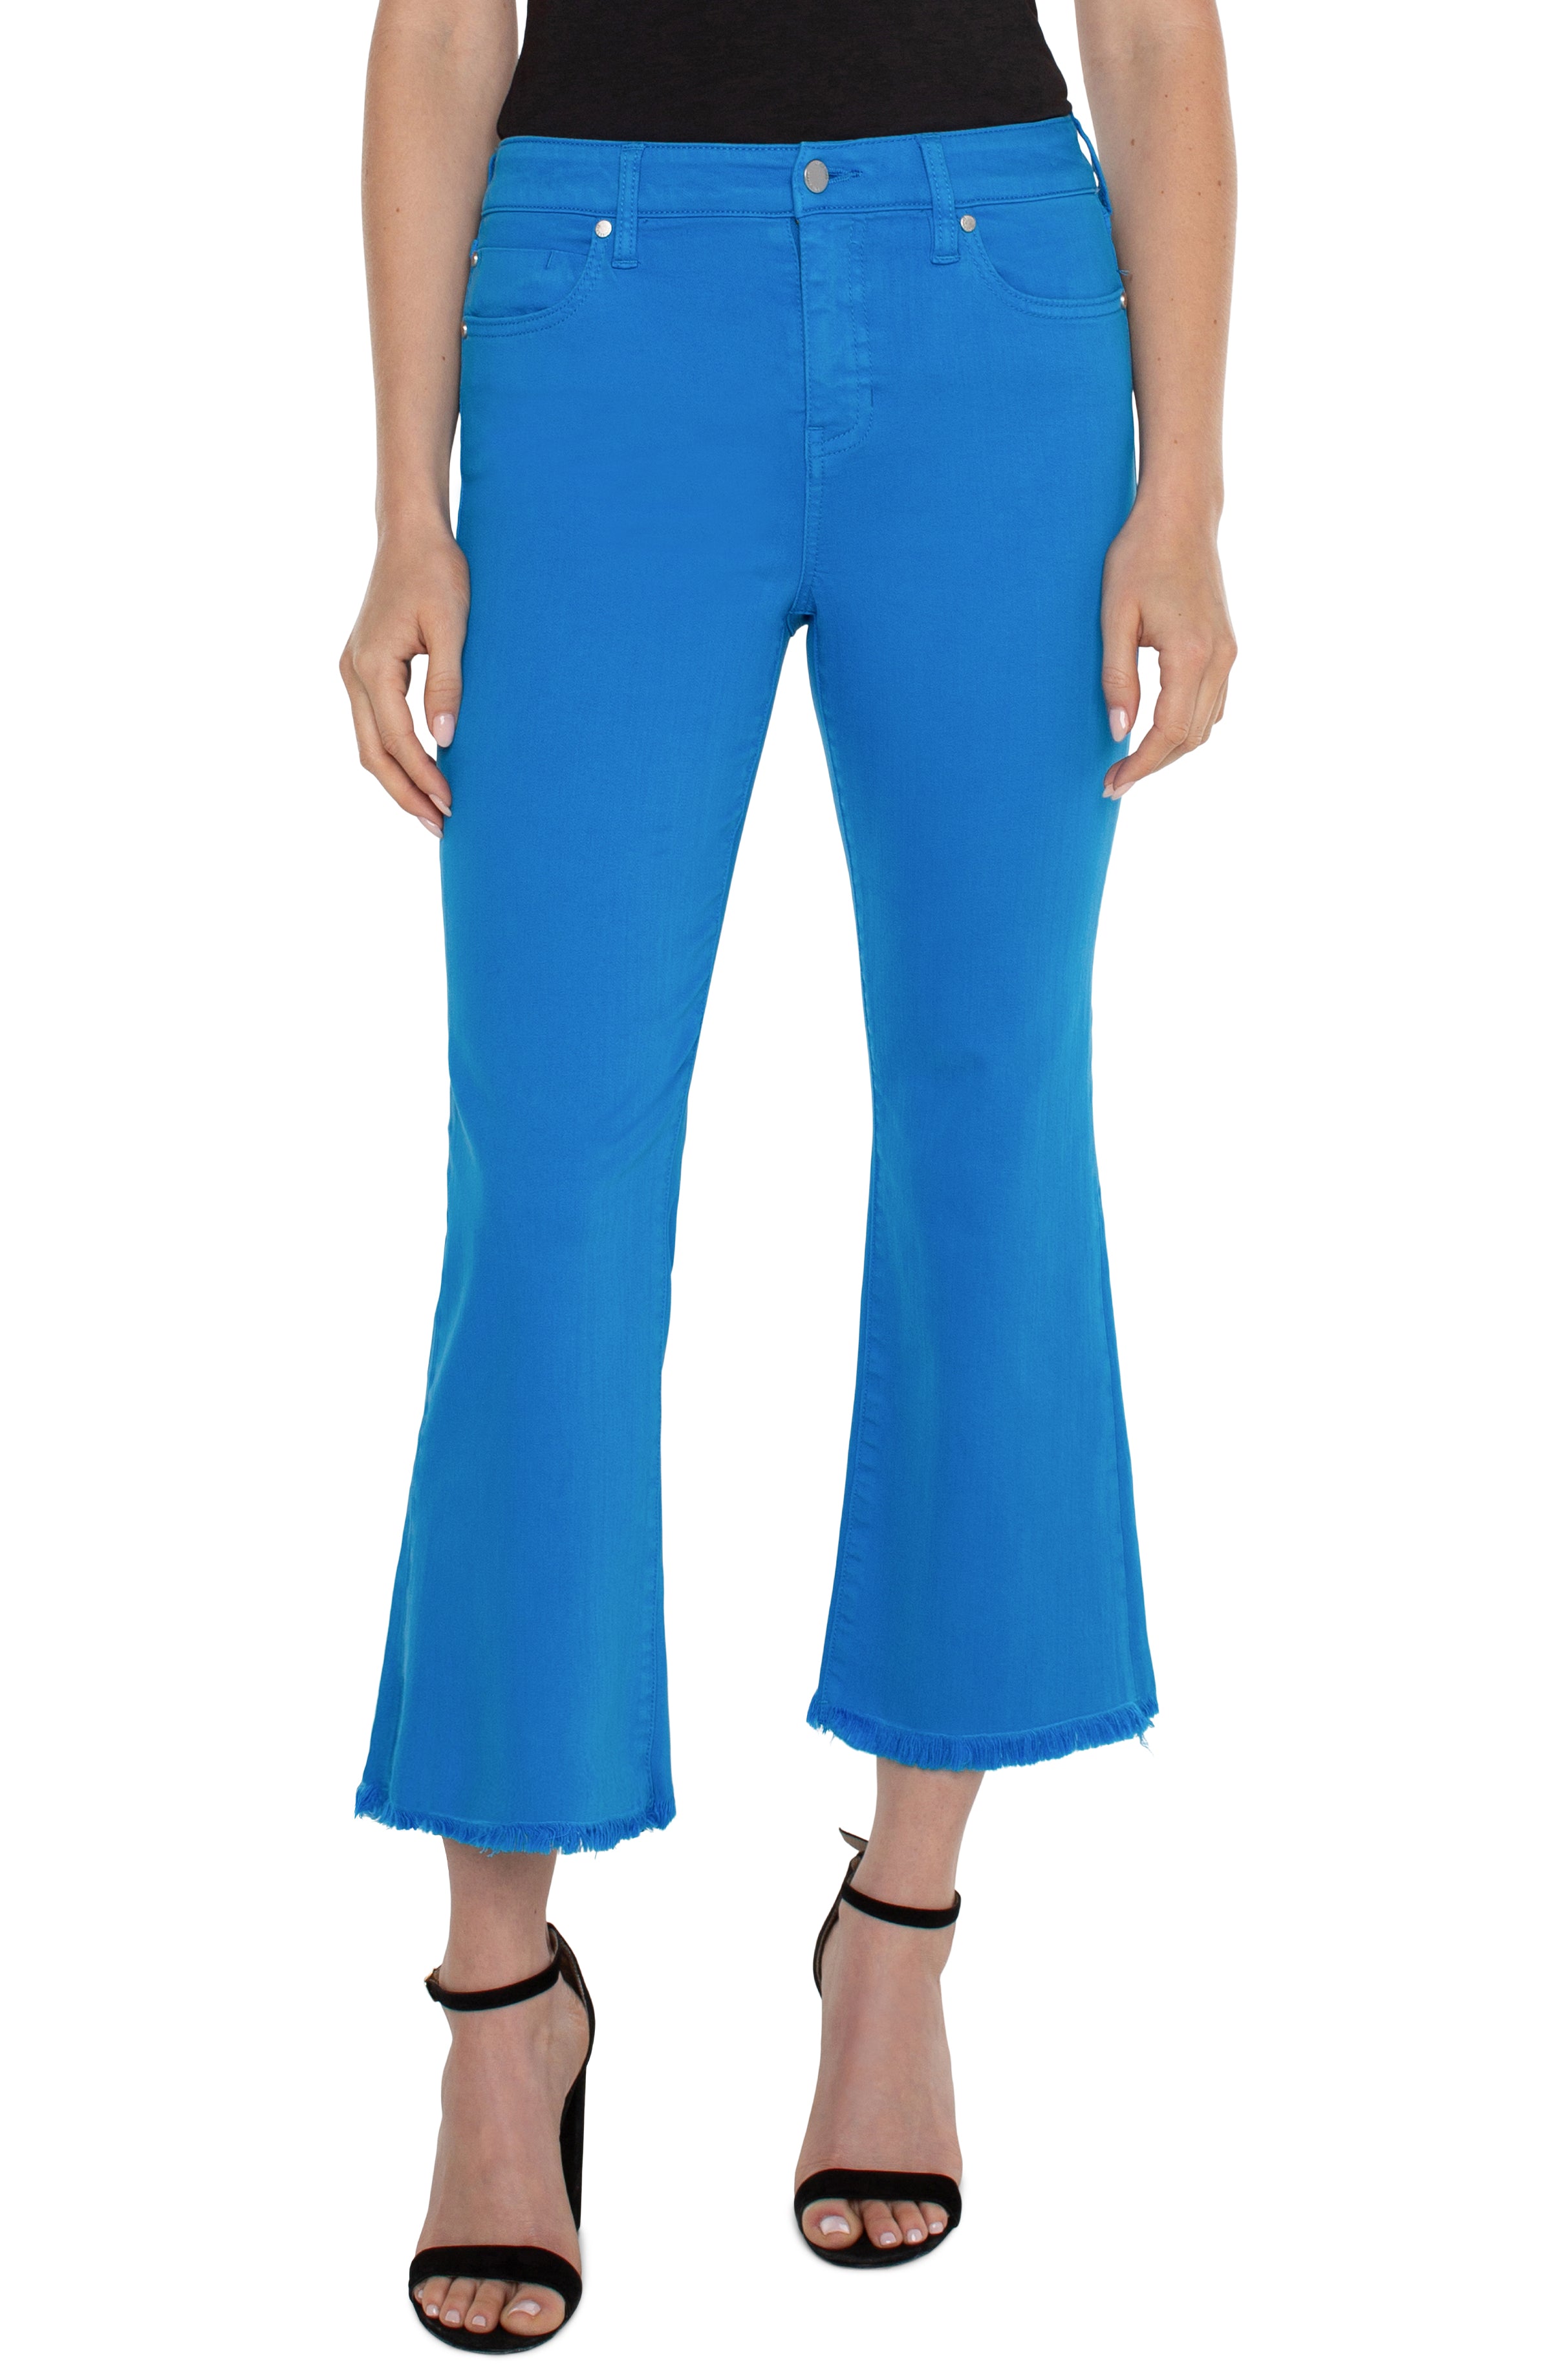 Liverpool Hannah Crop Flare with Fray Hem - Diva Blue Front View